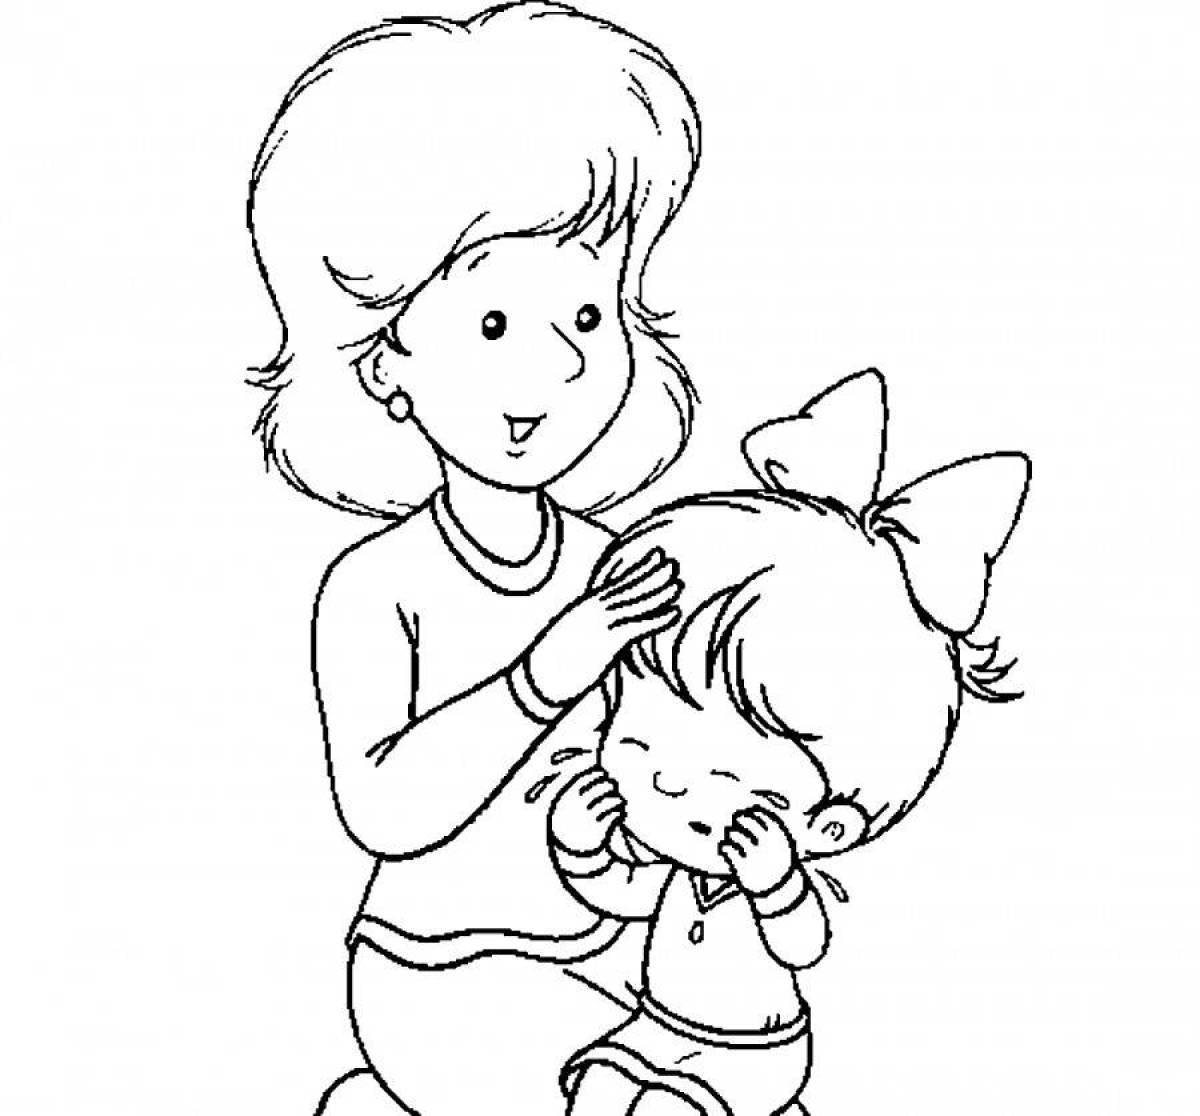 Inspirational mother coloring page